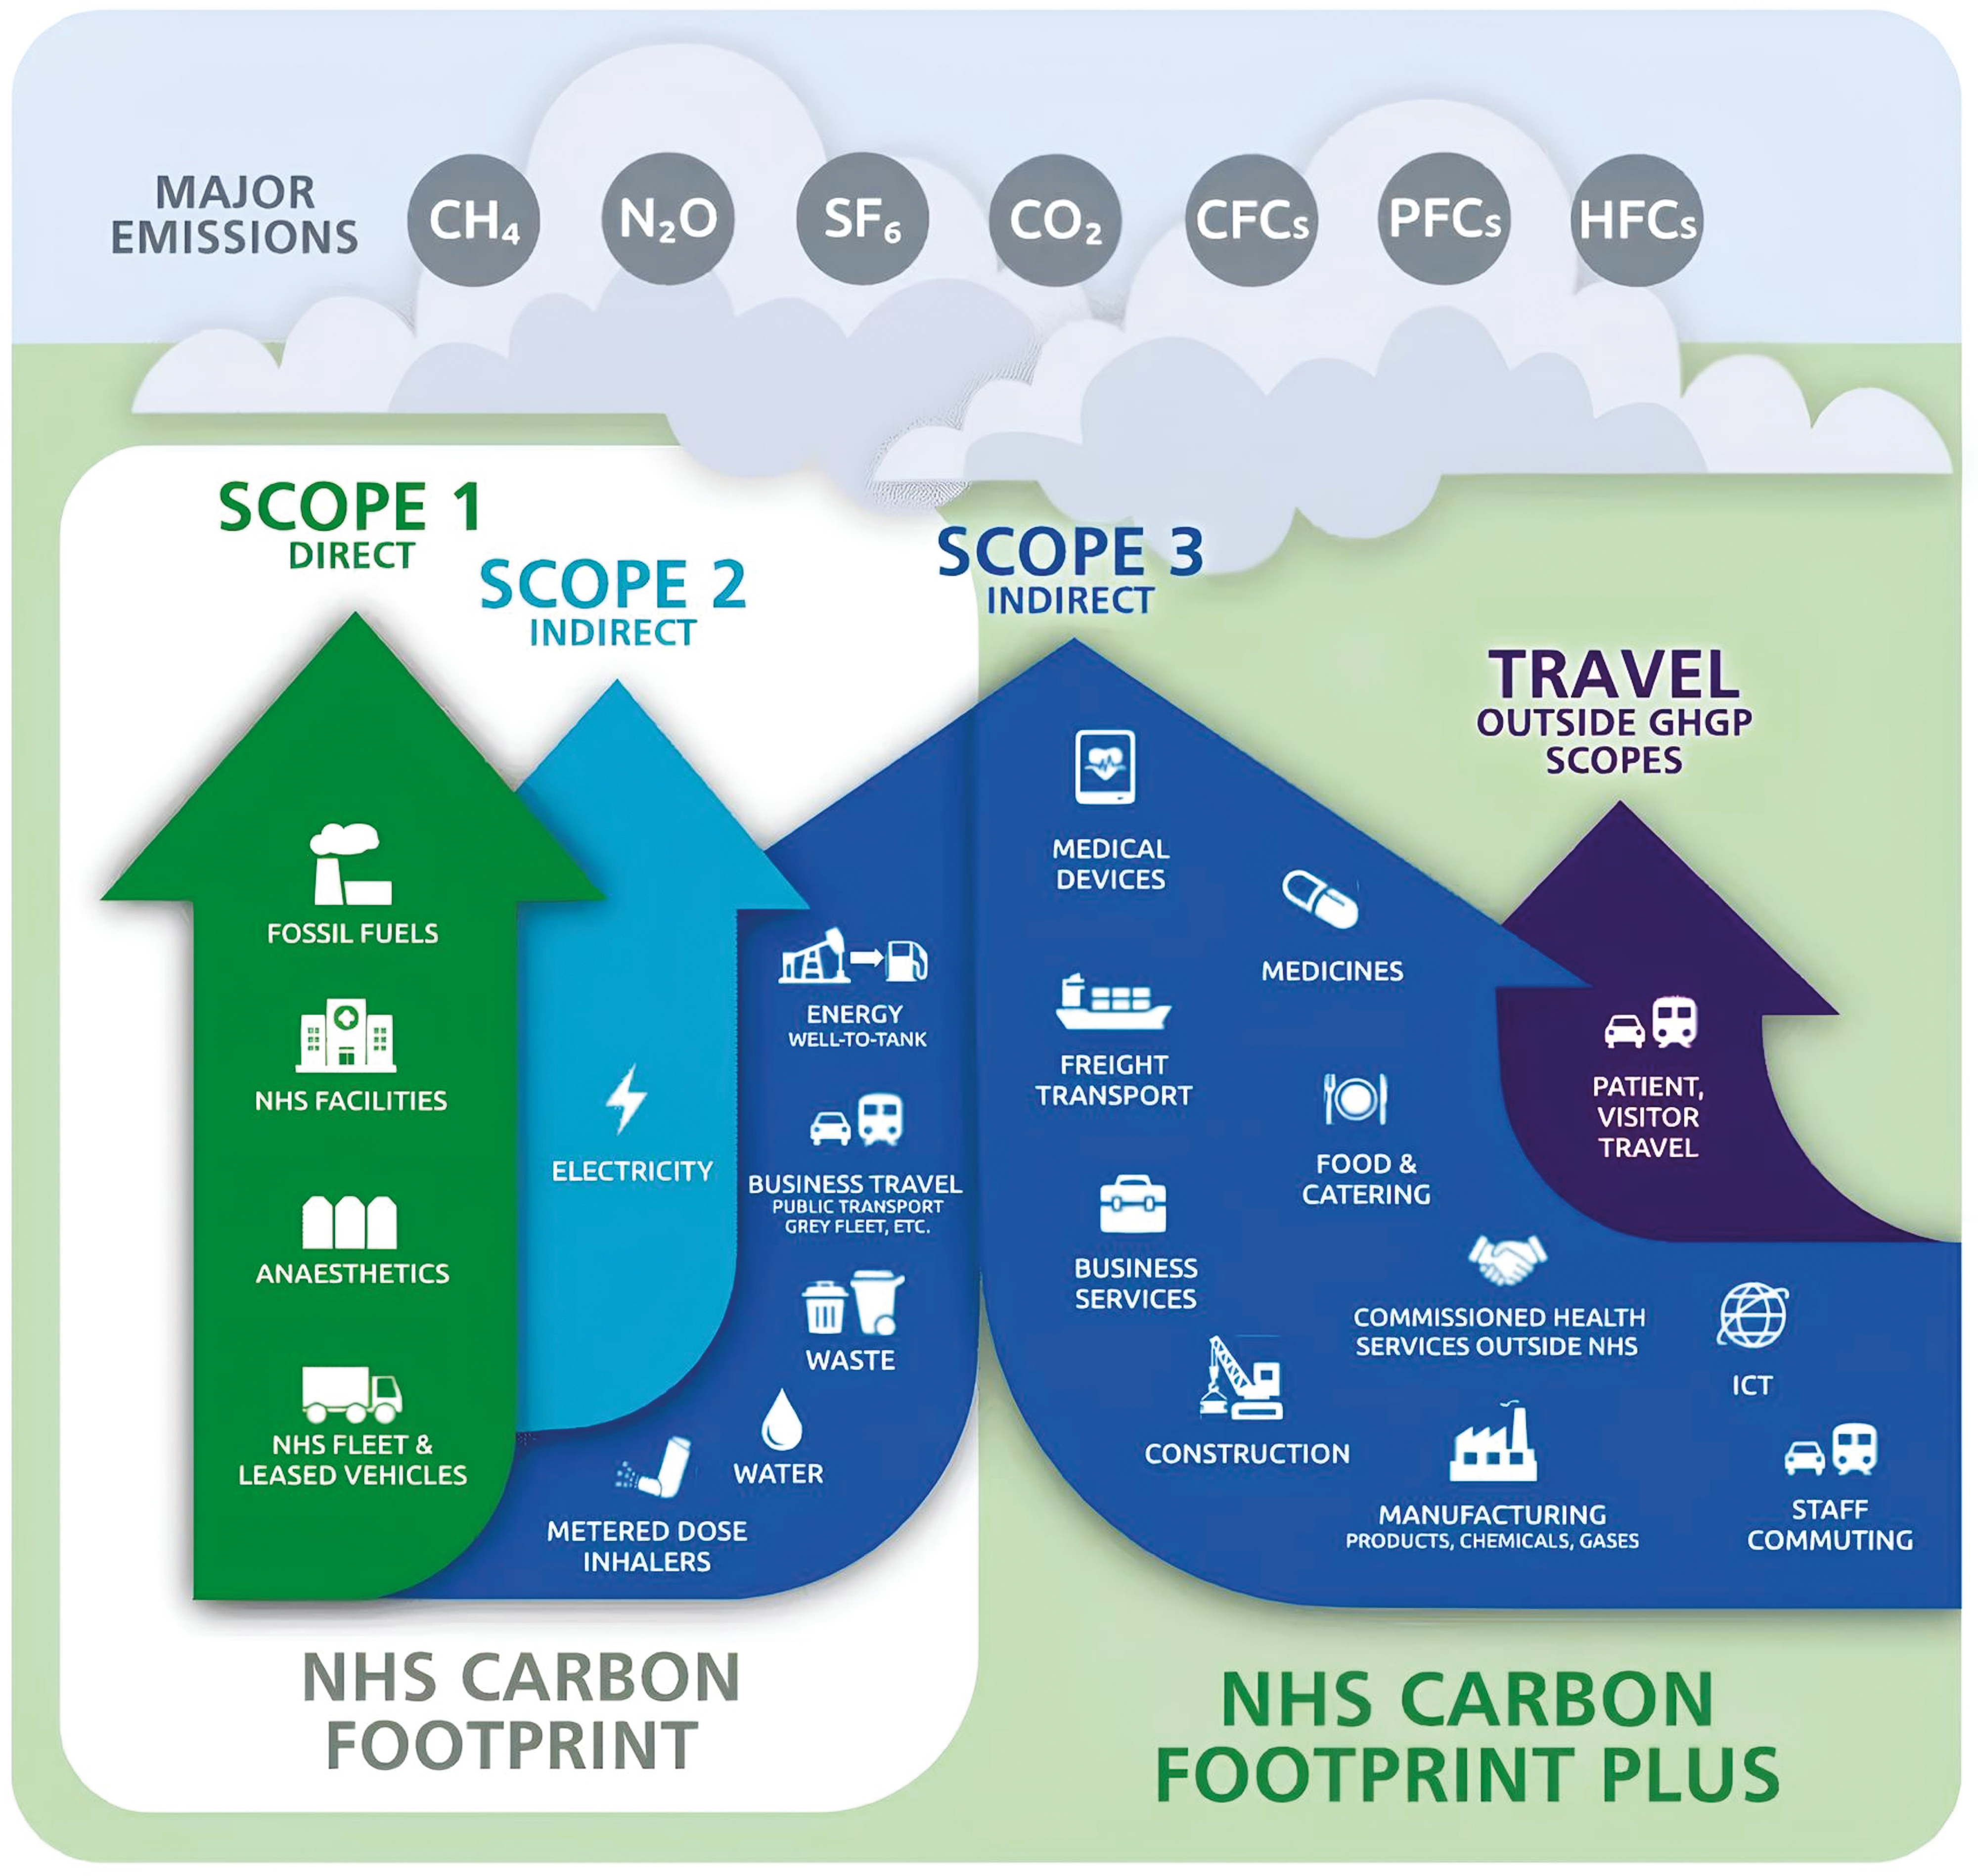 Scope 1, 2 and 3 emissions in the NHS [11]